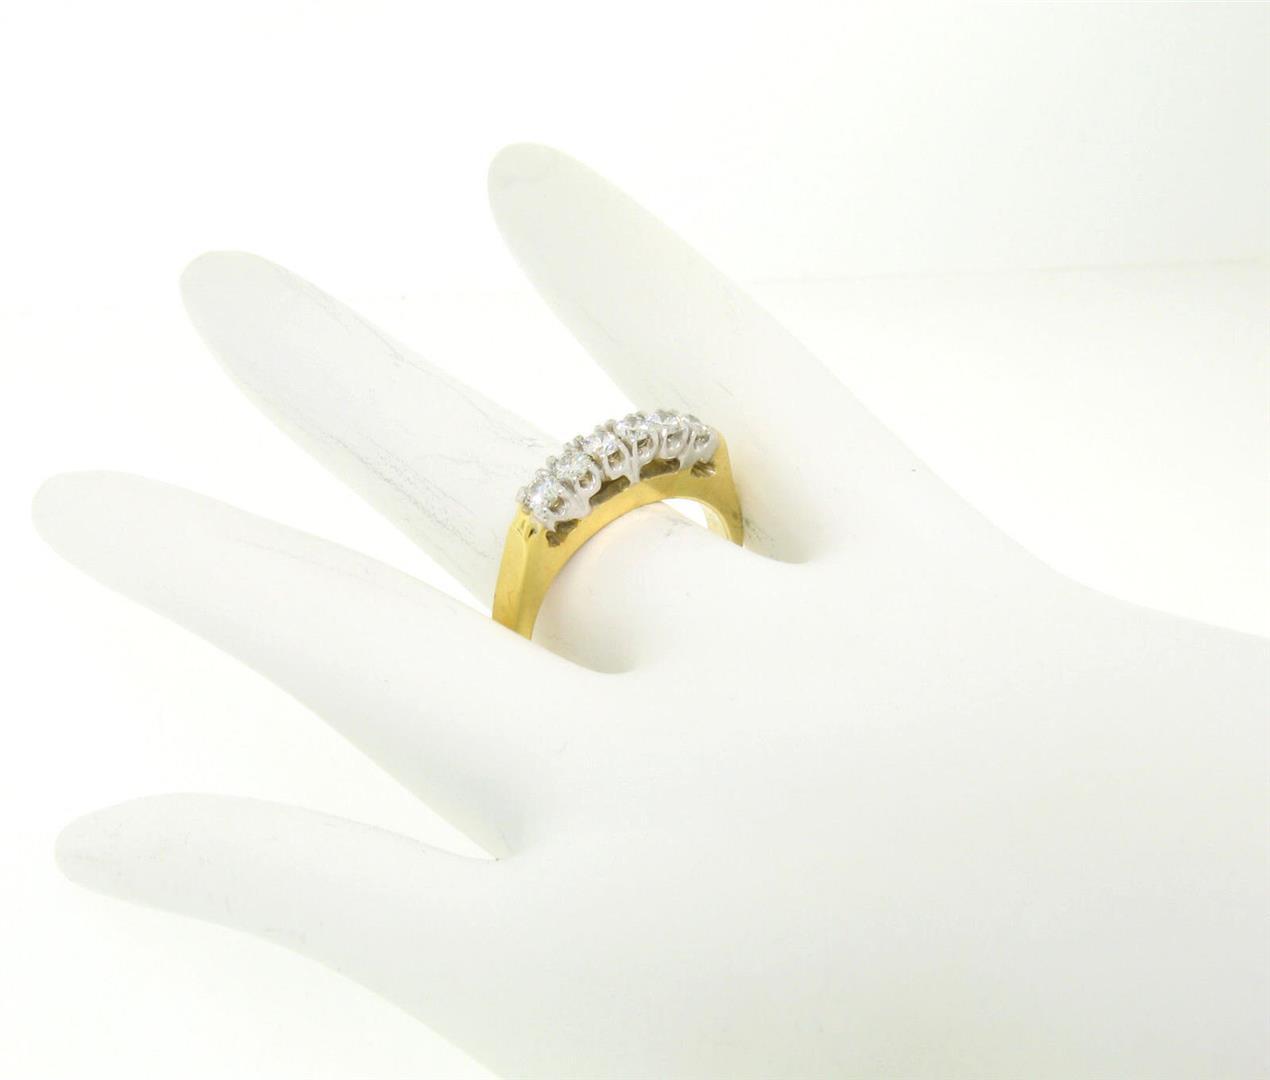 14k Two Tone Solid Gold 0.60 ctw Band Ring with 6 Brilliant Round Diamonds